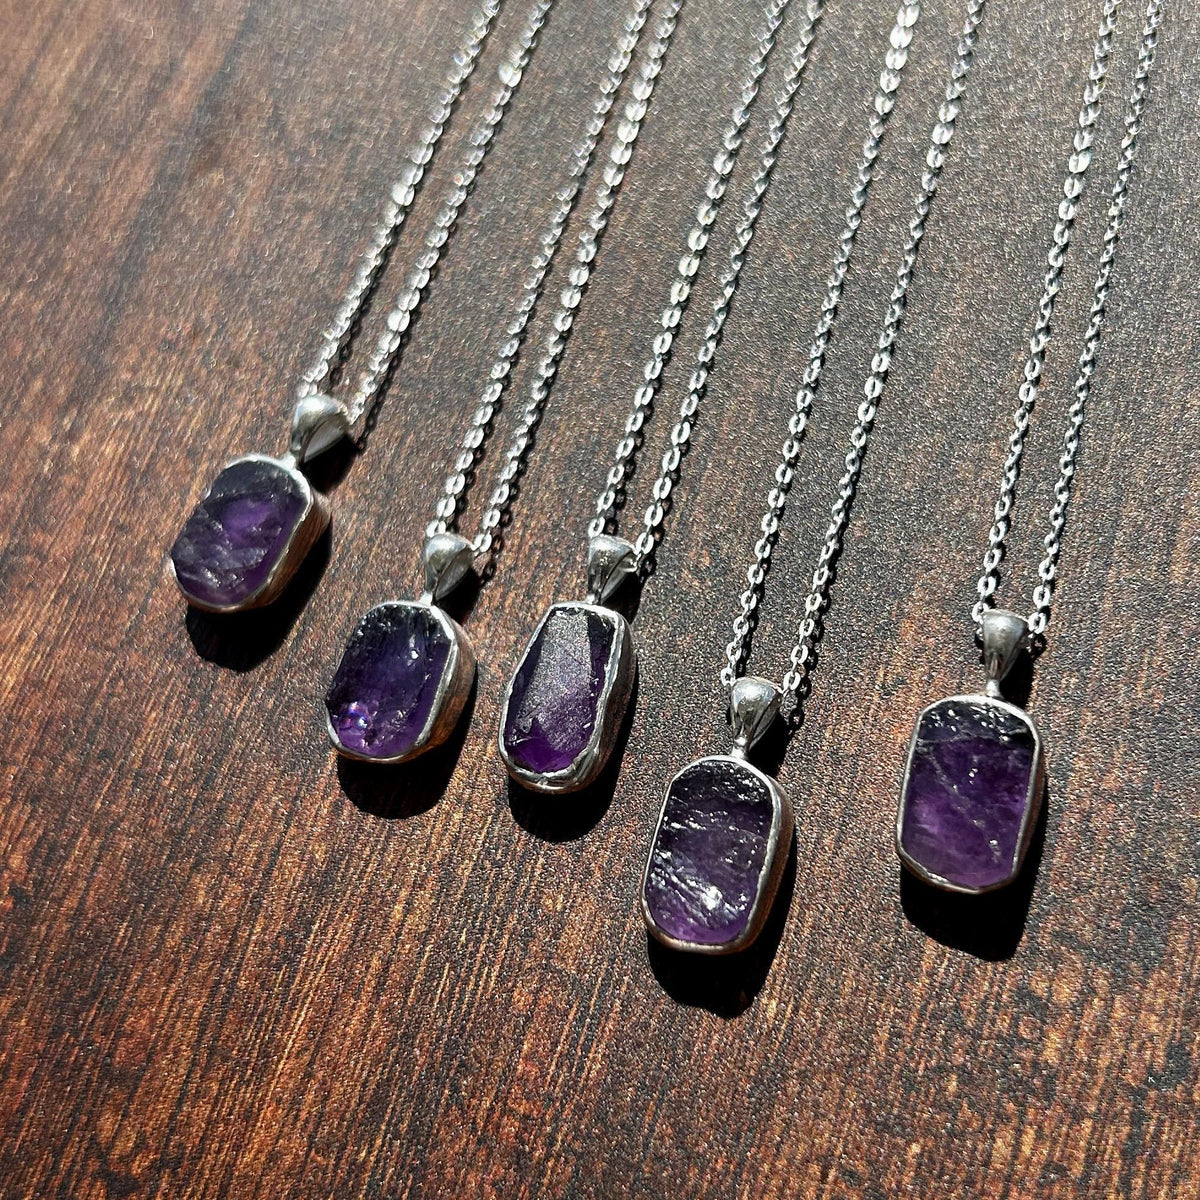 Amethyst Rough Sterling Silver Crystal Necklace